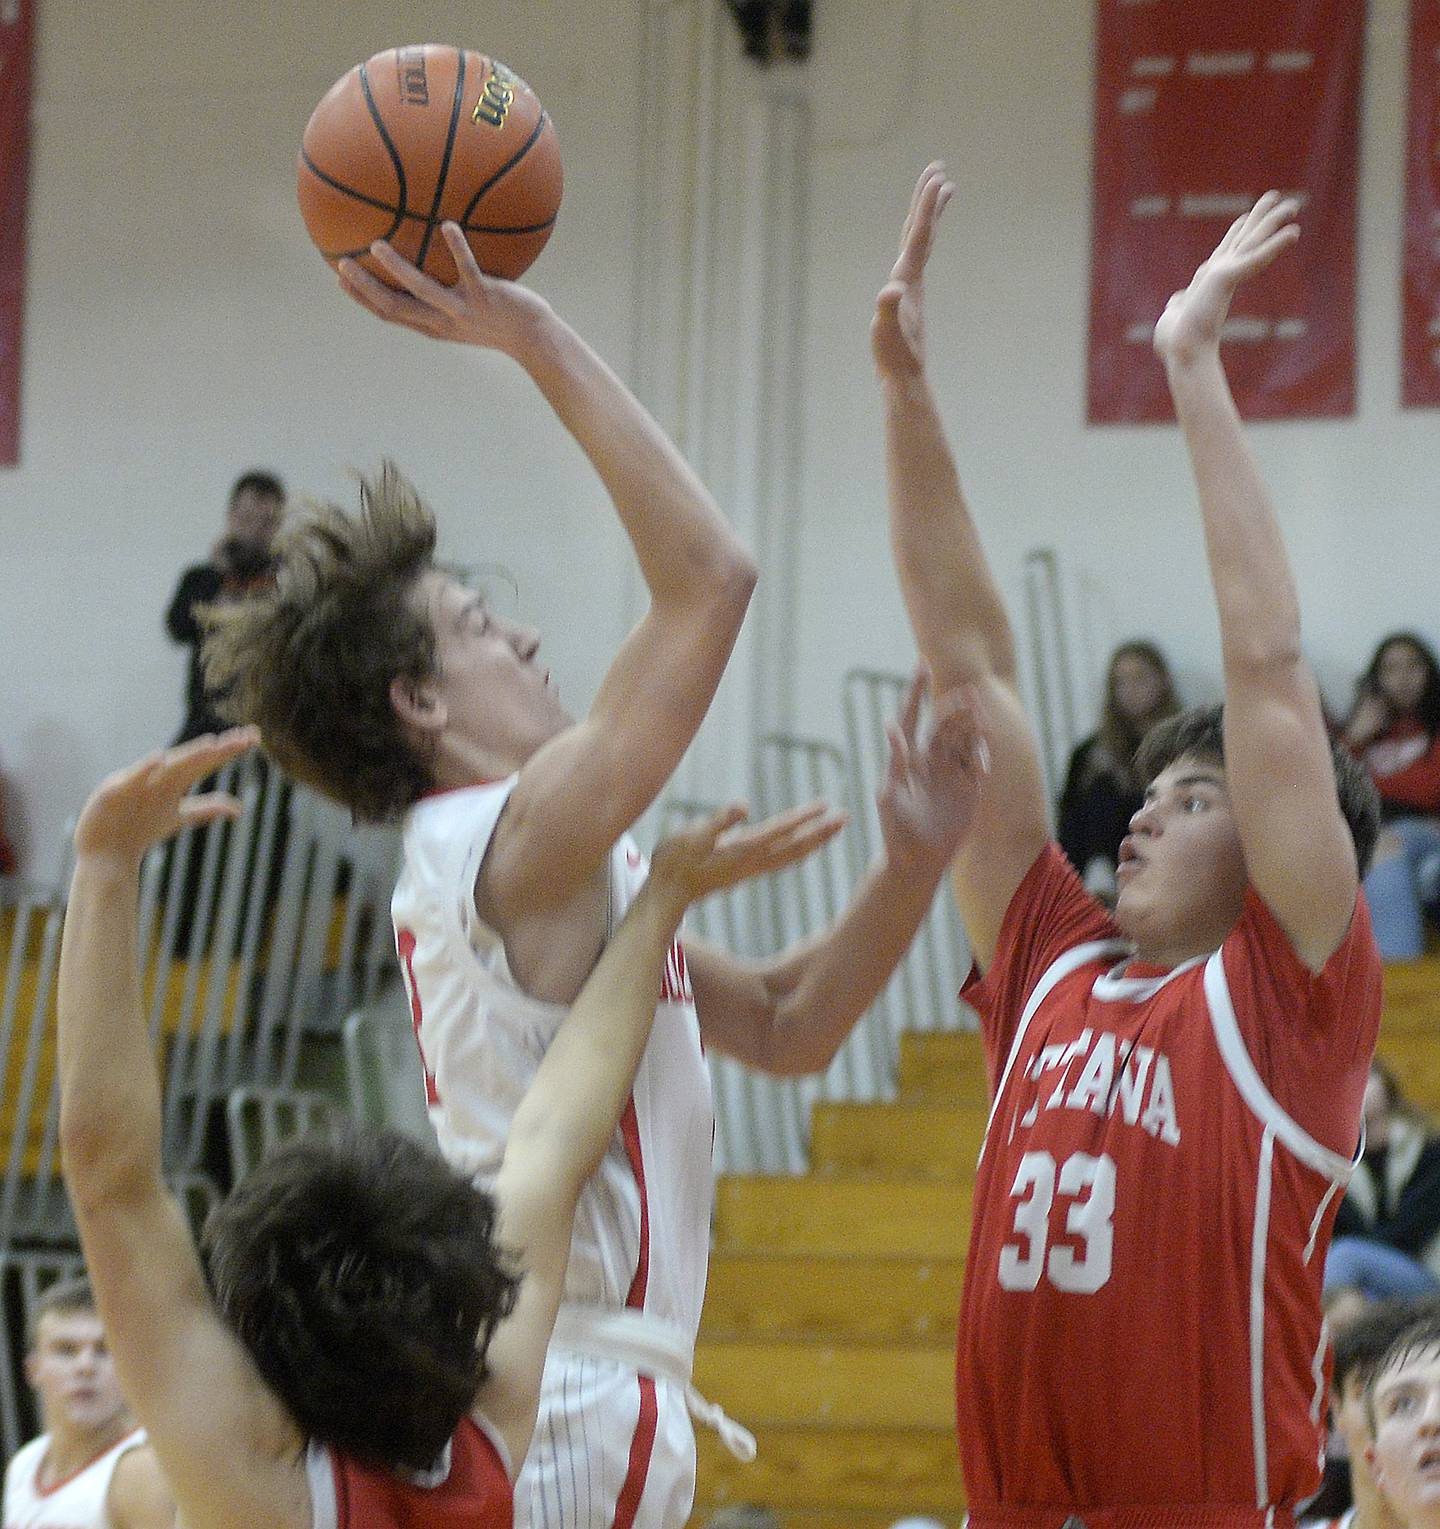 Streator's Matt Williamson rises for a shot while being defended by Ottawa's Cooper Knoll (33) Saturday, Dec. 10, 2022, at Pops Dale Gymnasium in Streator.